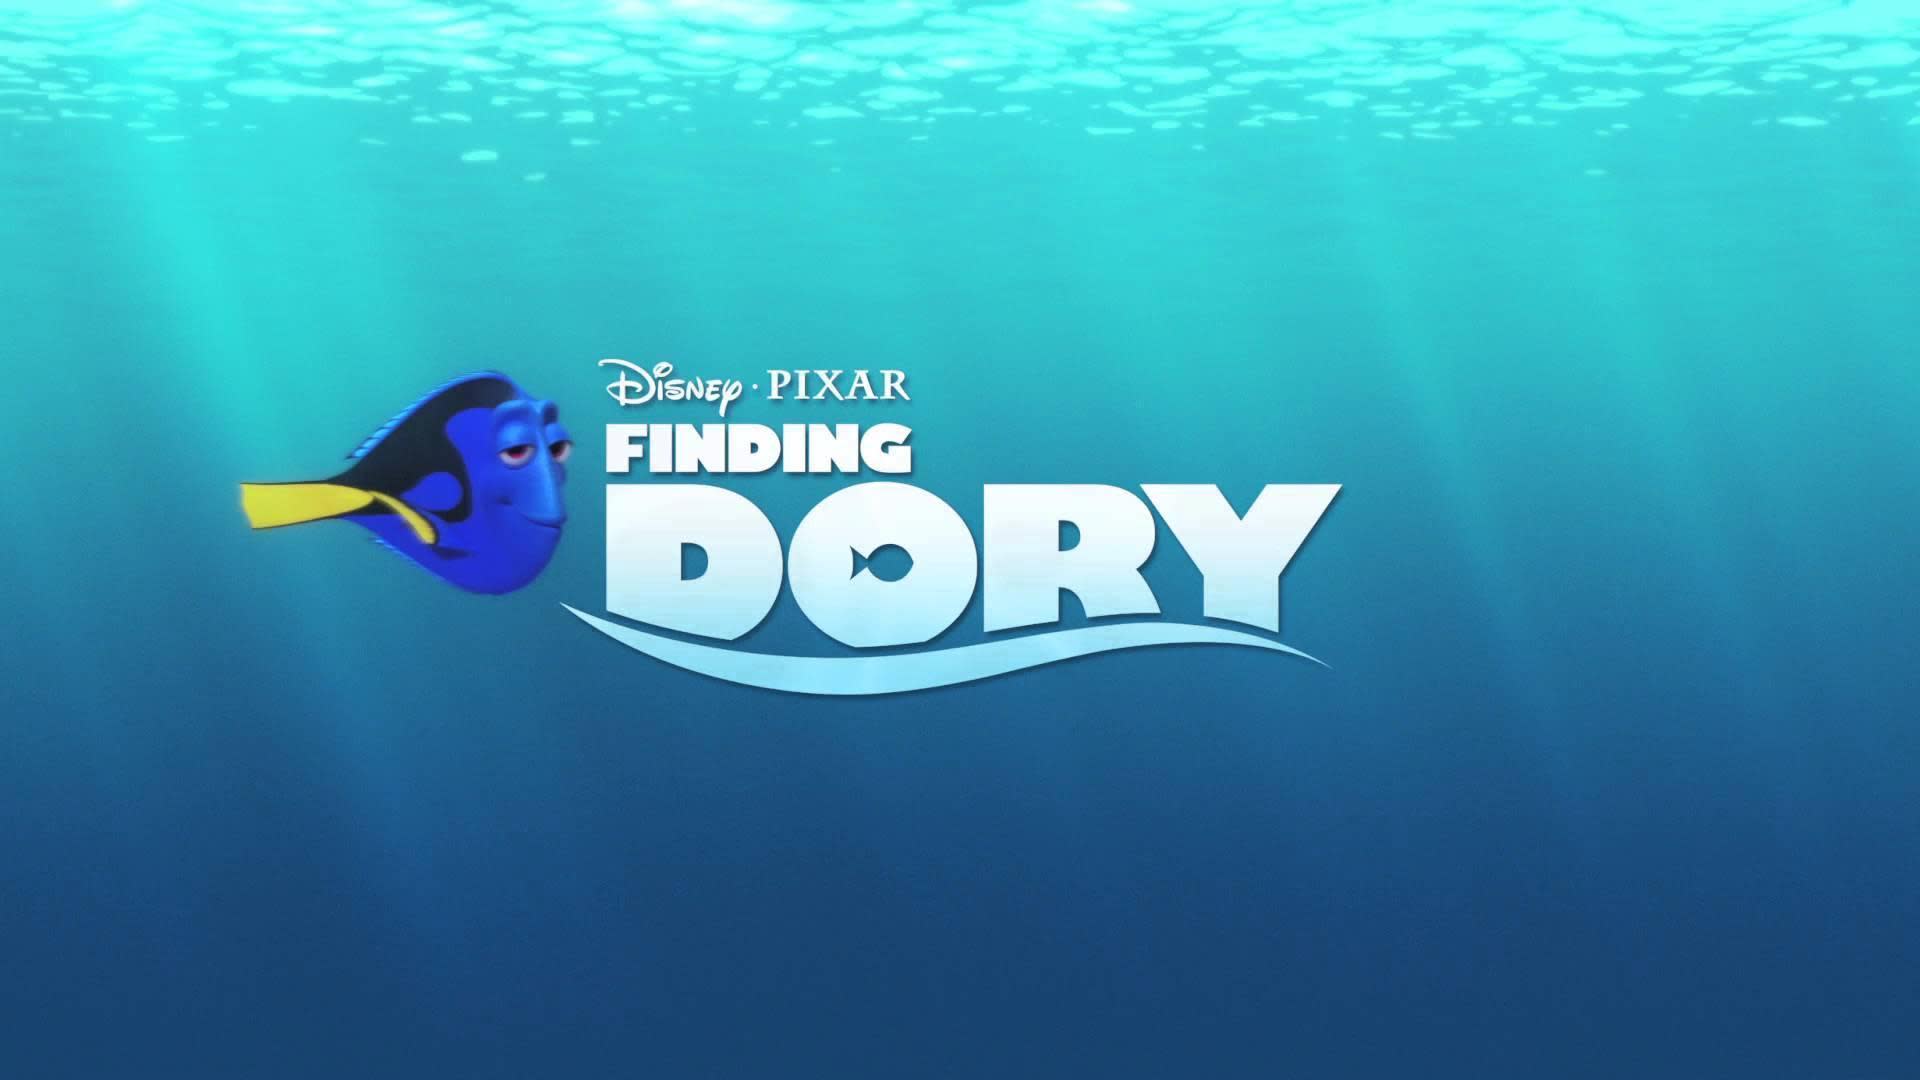 New Finding Dory Teaser Has A Swimming Time With New Title